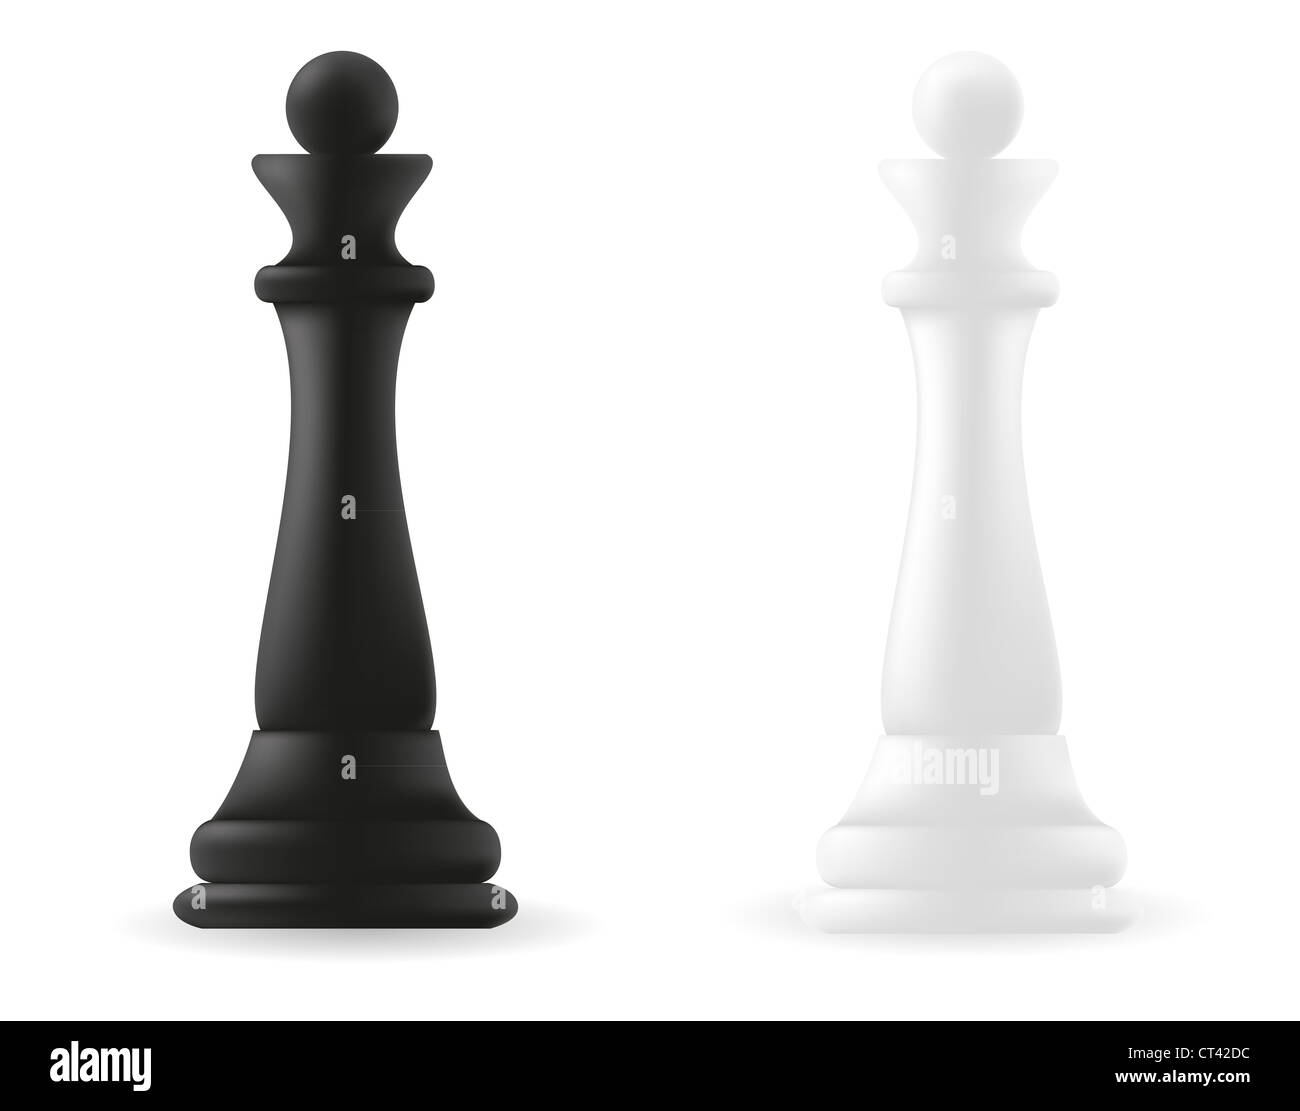 queen chess piece black and white illustration Stock Photo